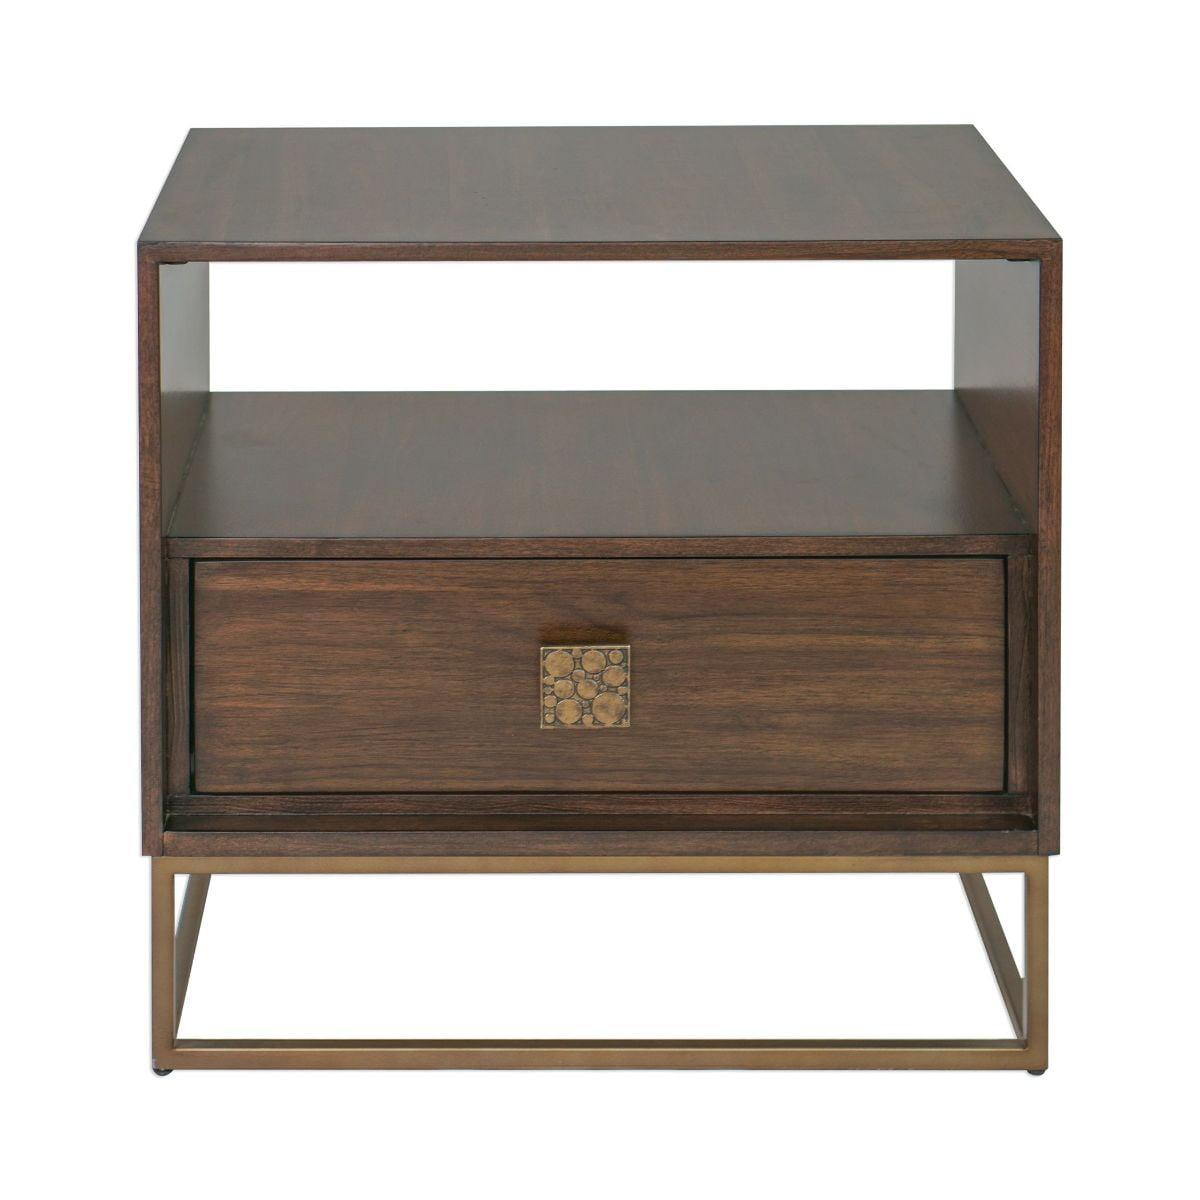 Walnut and Brass Rectangular Side Table with Storage